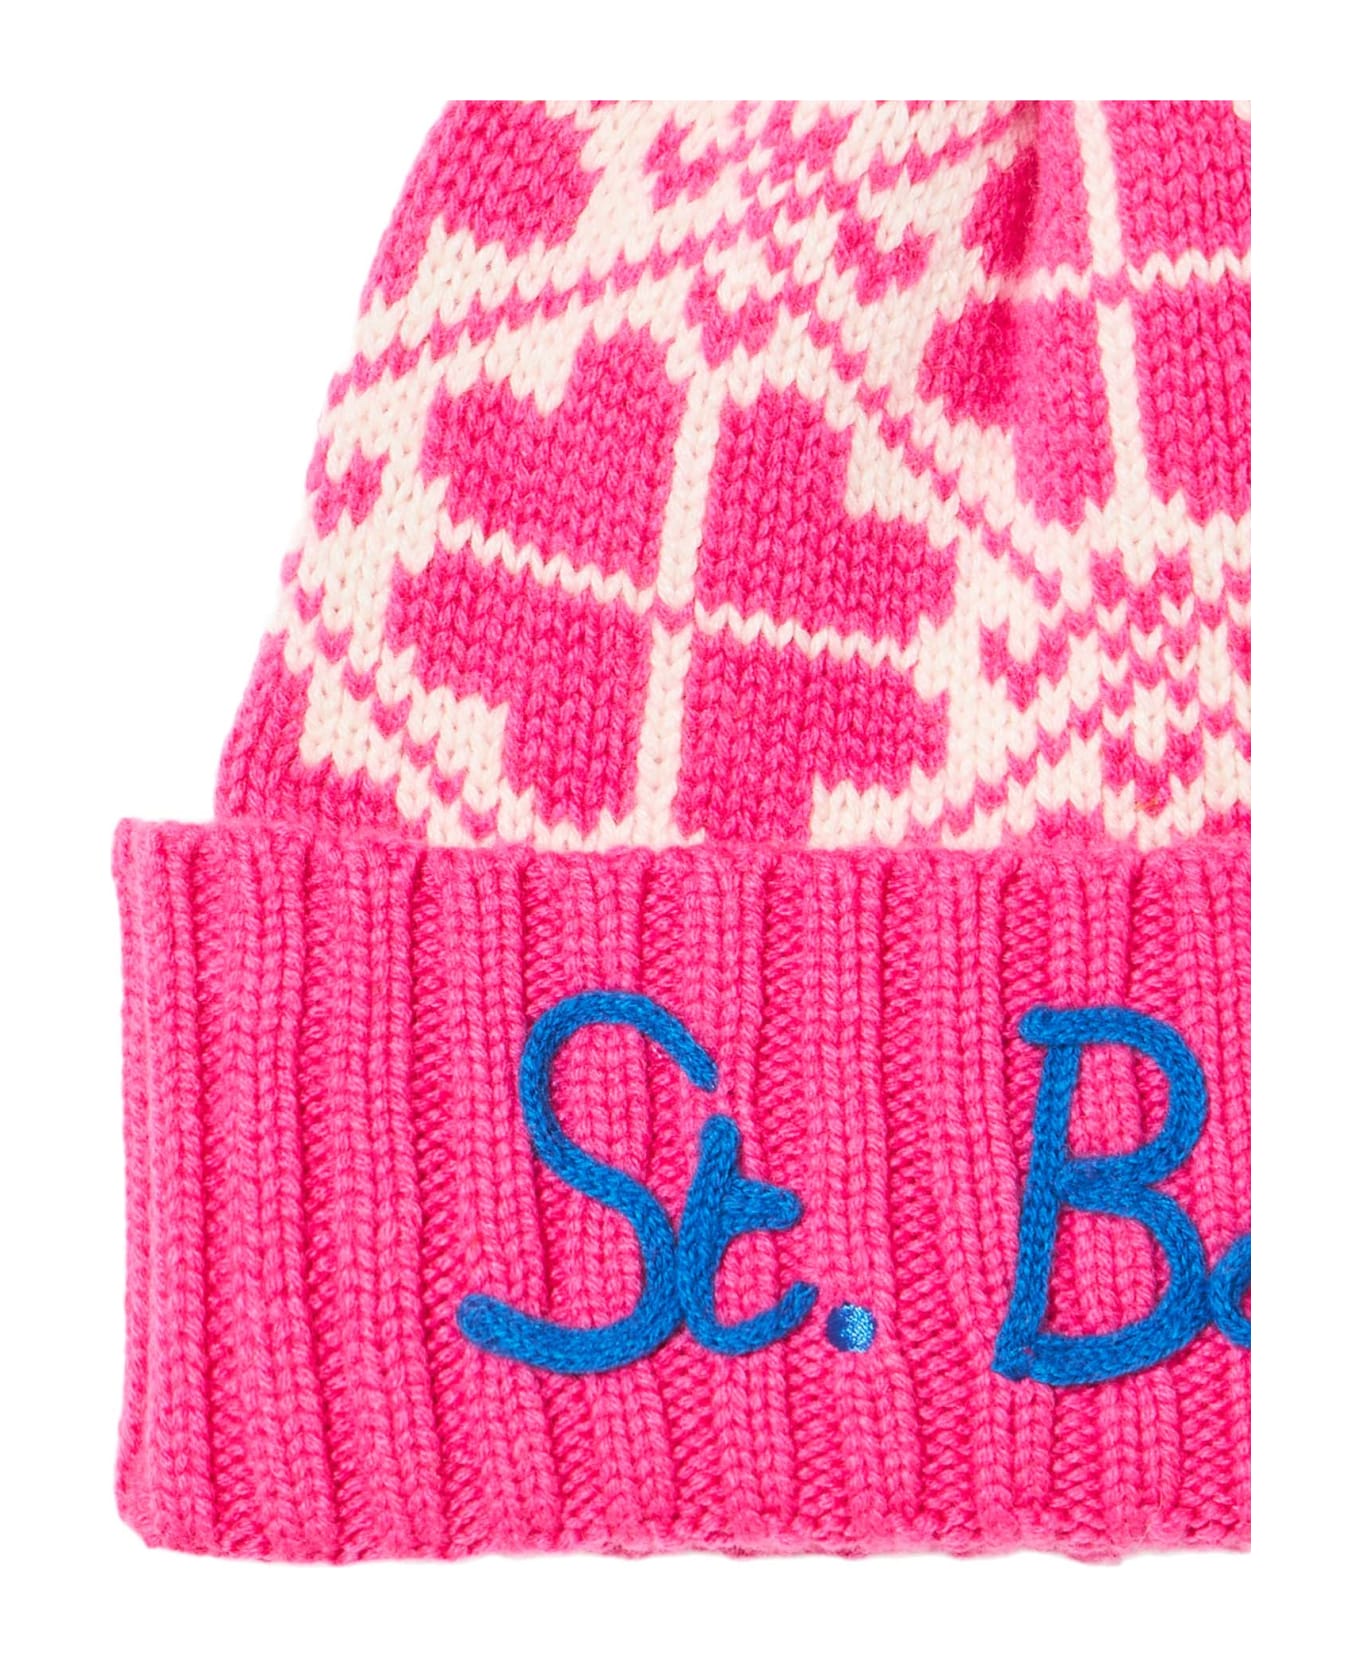 MC2 Saint Barth Woman Fluo Pink Beanie With Pattern - PINK